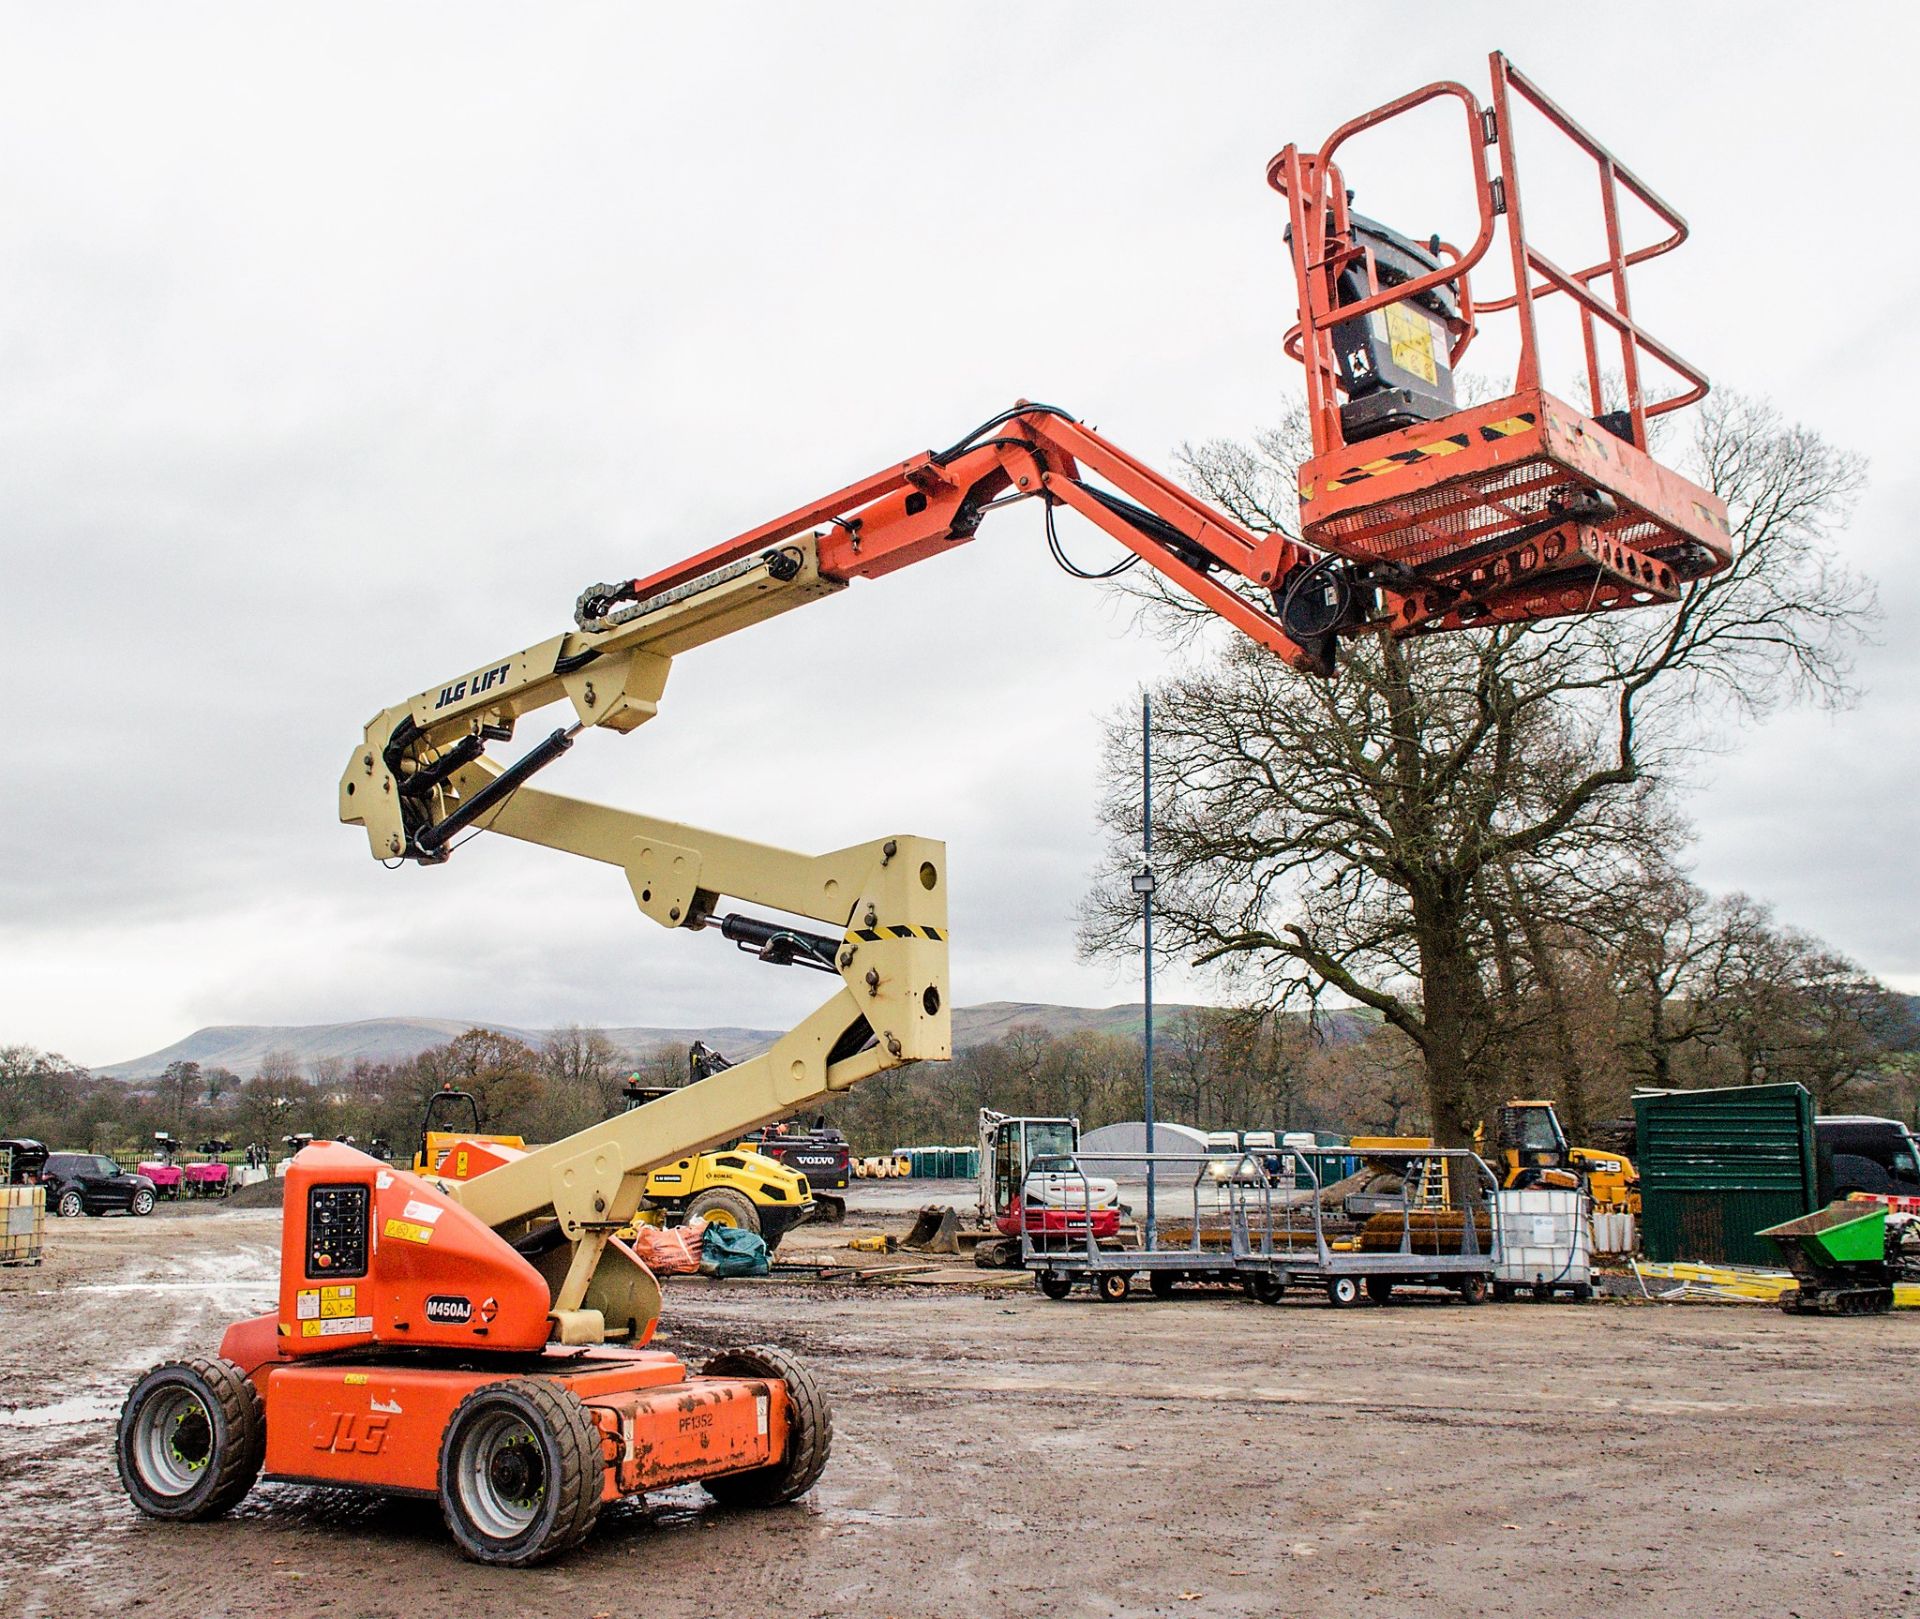 JLG M450AJ battery/diesel articulated boom access platform Year: 2011 S/N: 150483 Recorded Hours: - Image 7 of 13